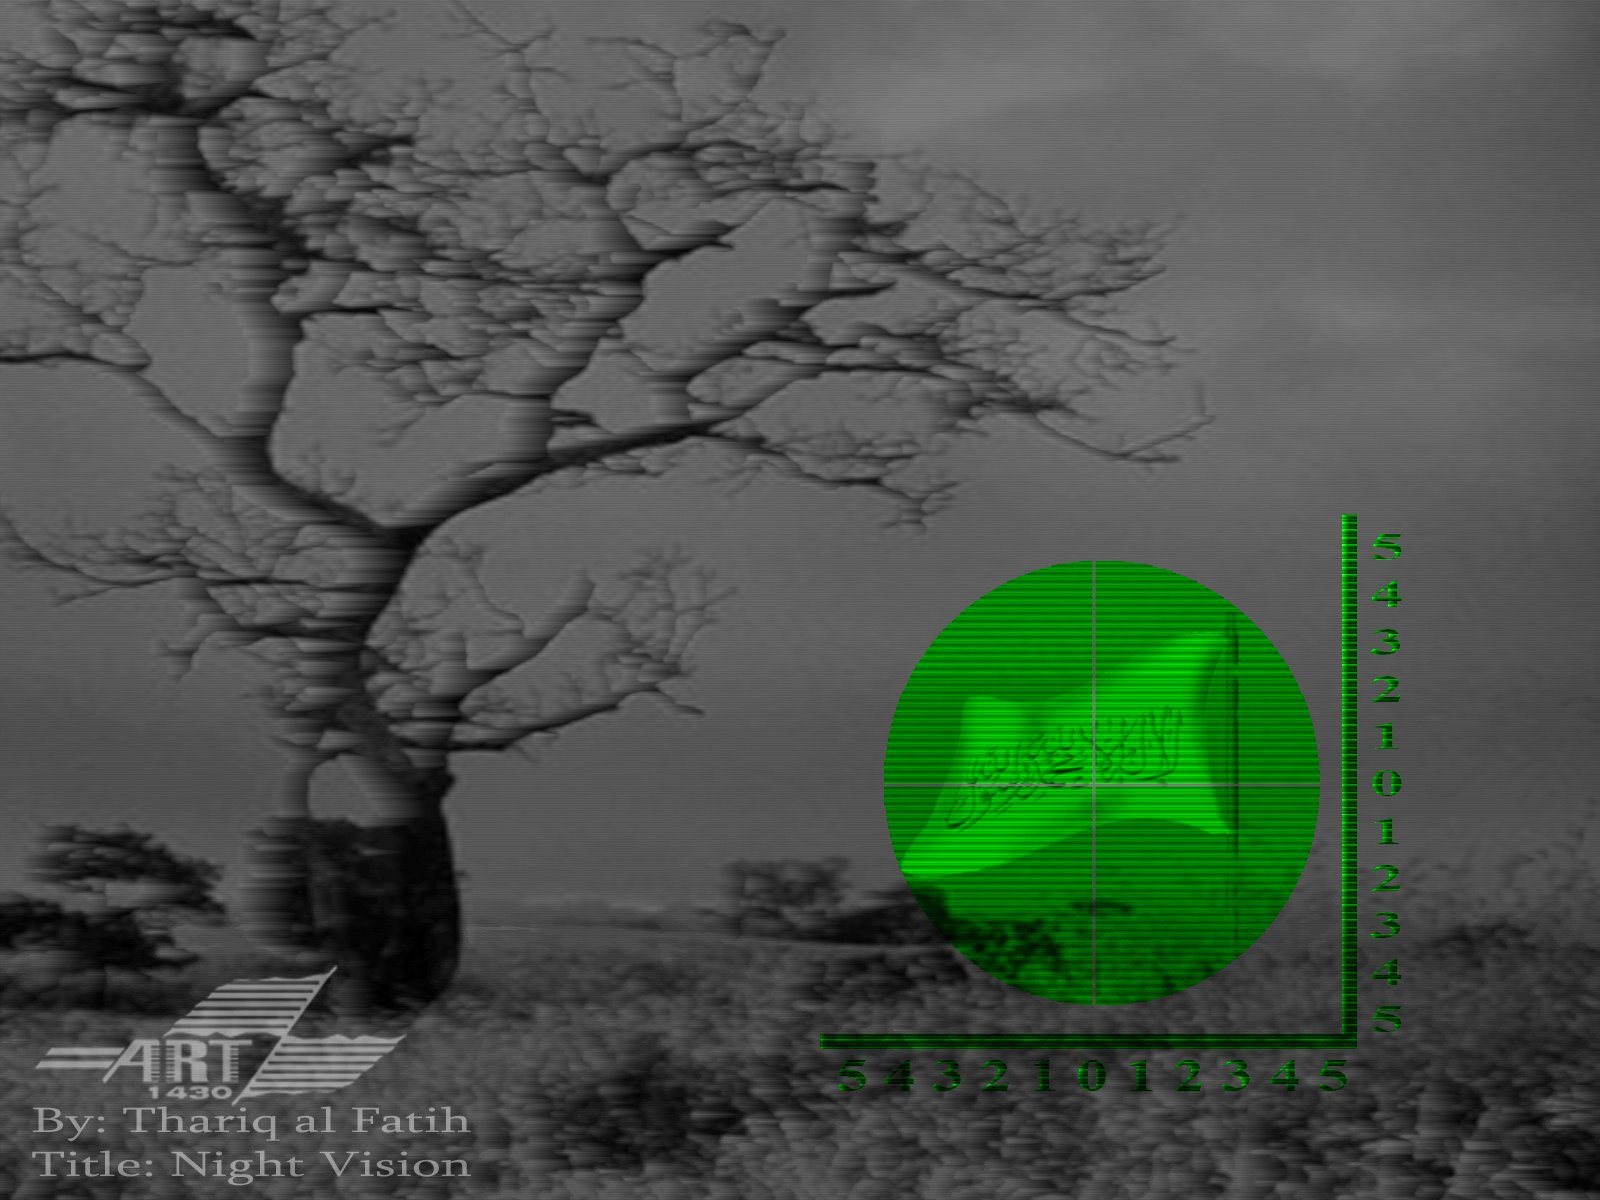 [[=Z] Images id-516 Night Vision.jpg]